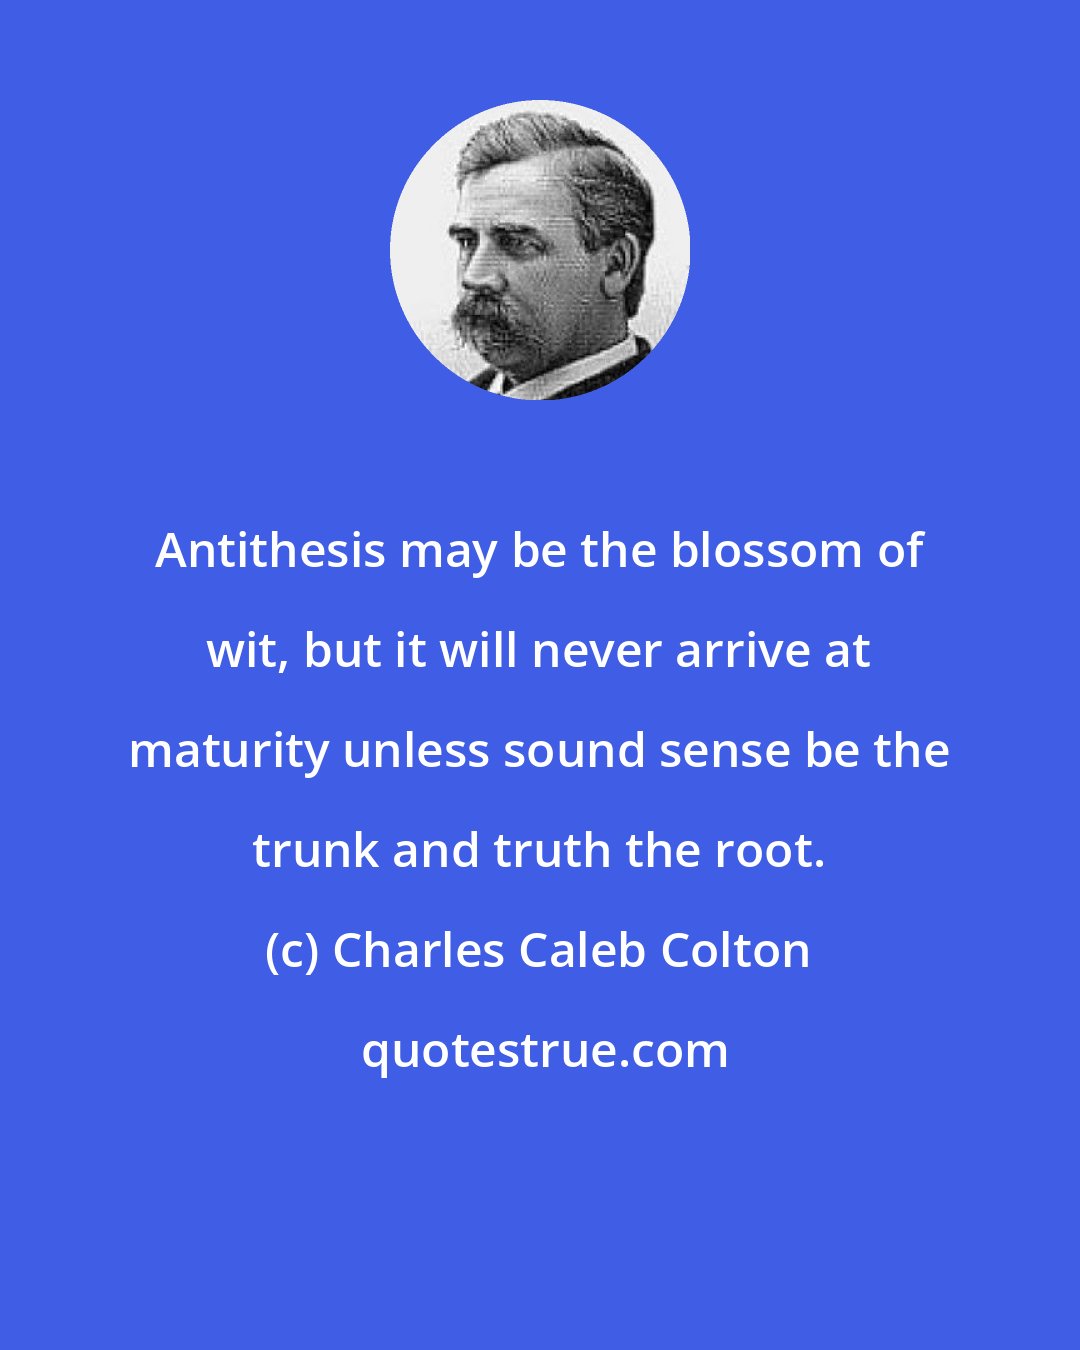 Charles Caleb Colton: Antithesis may be the blossom of wit, but it will never arrive at maturity unless sound sense be the trunk and truth the root.